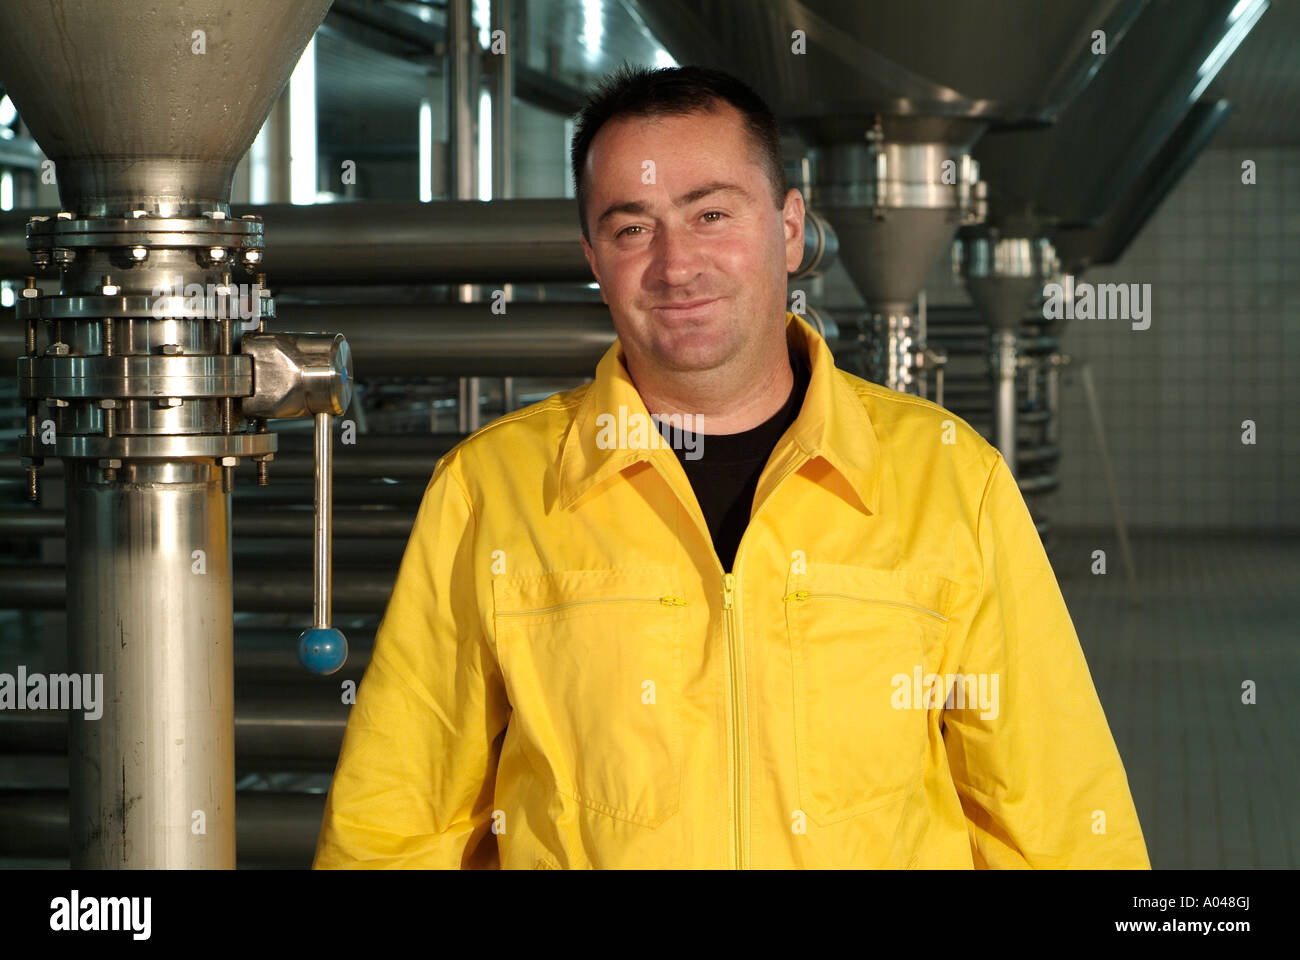 Male Brewery Worker Standing by Industrial Brewing Equipment Stock Photo